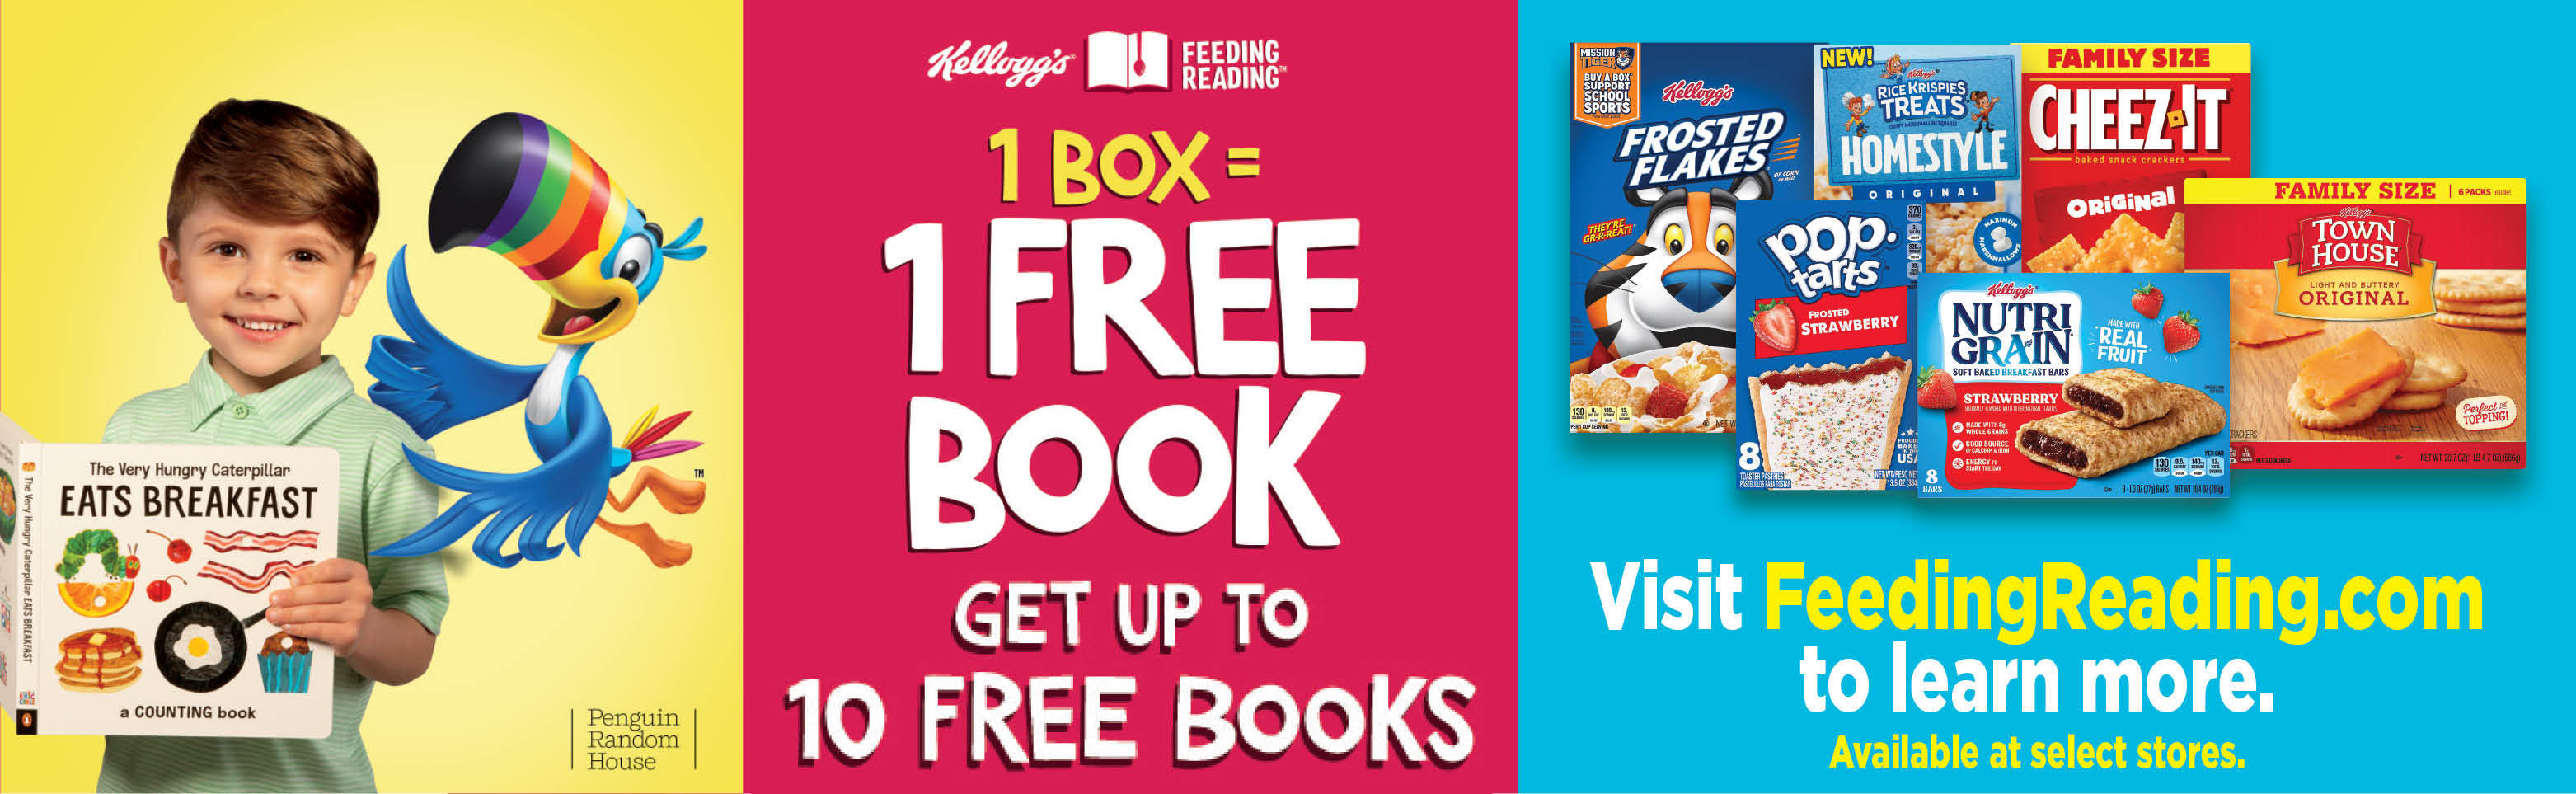 Kellogg's - Back to School - Learn more